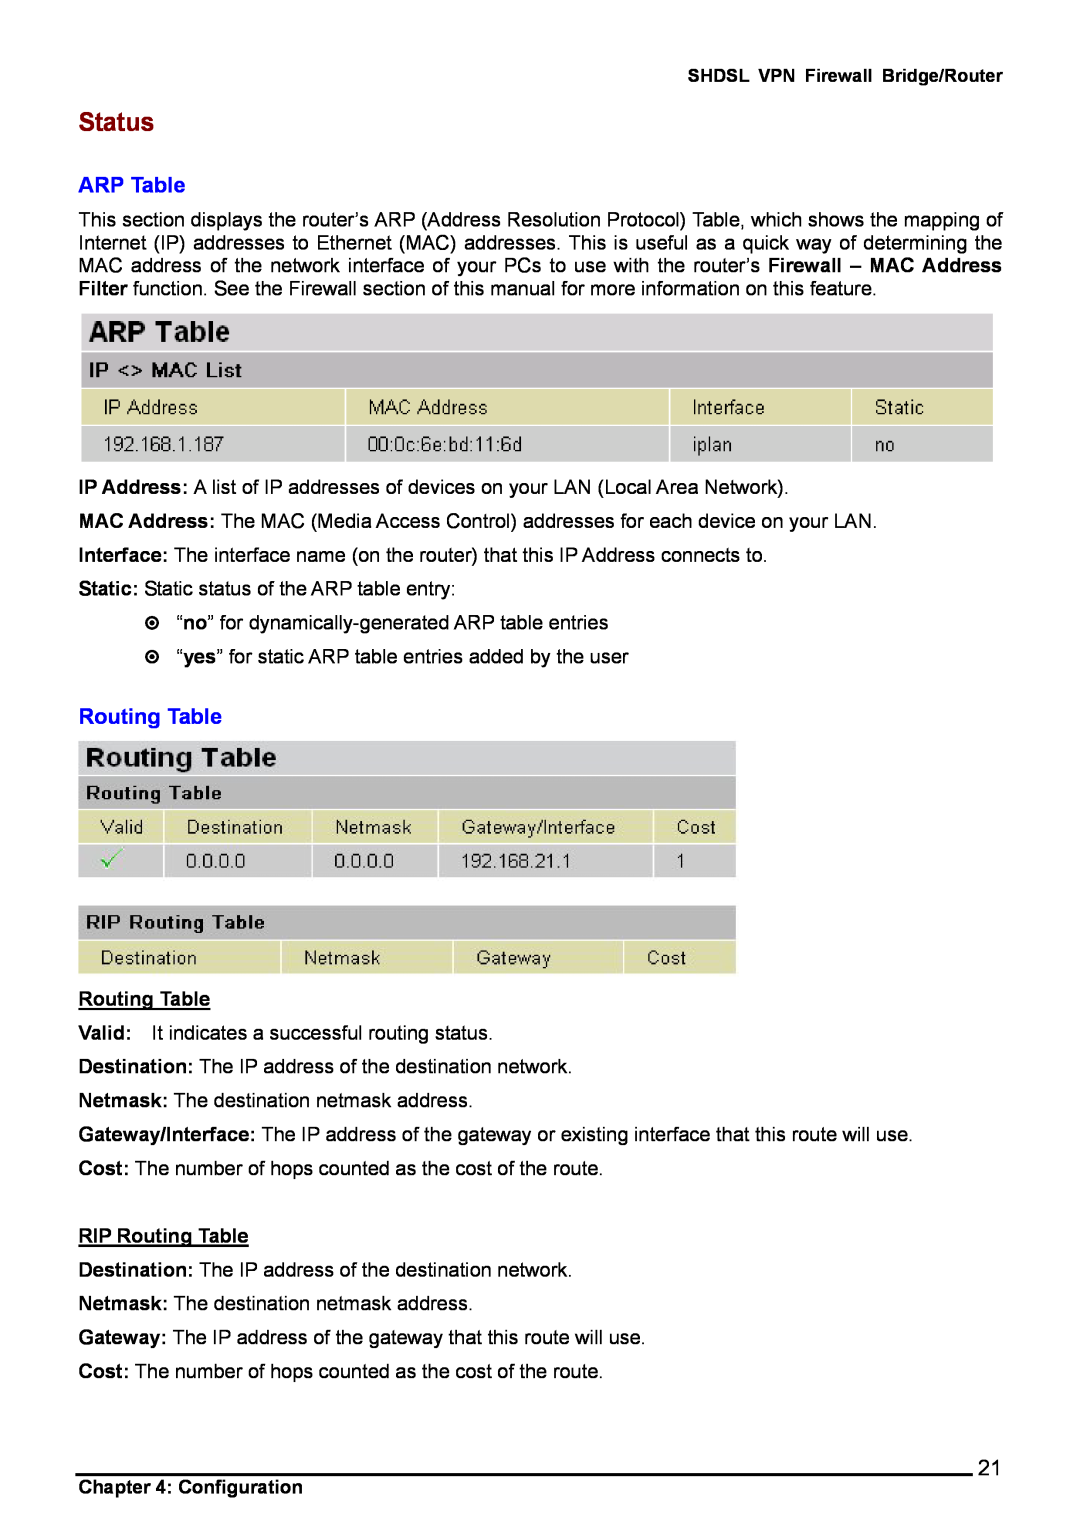 Billion Electric Company 8501 user manual Status, ARP Table, RIP Routing Table 